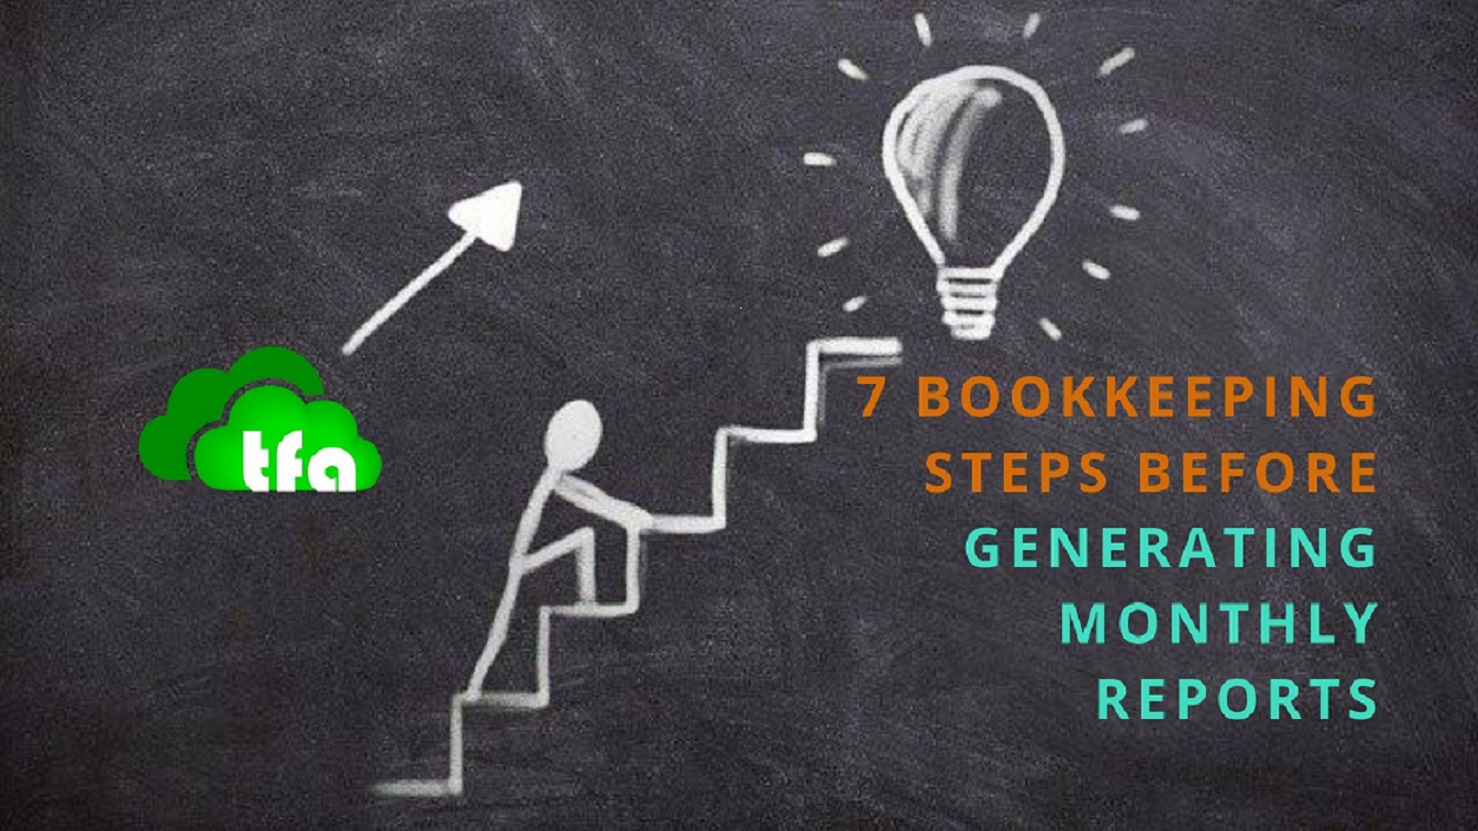 7 bookkeeping steps before monthly reports